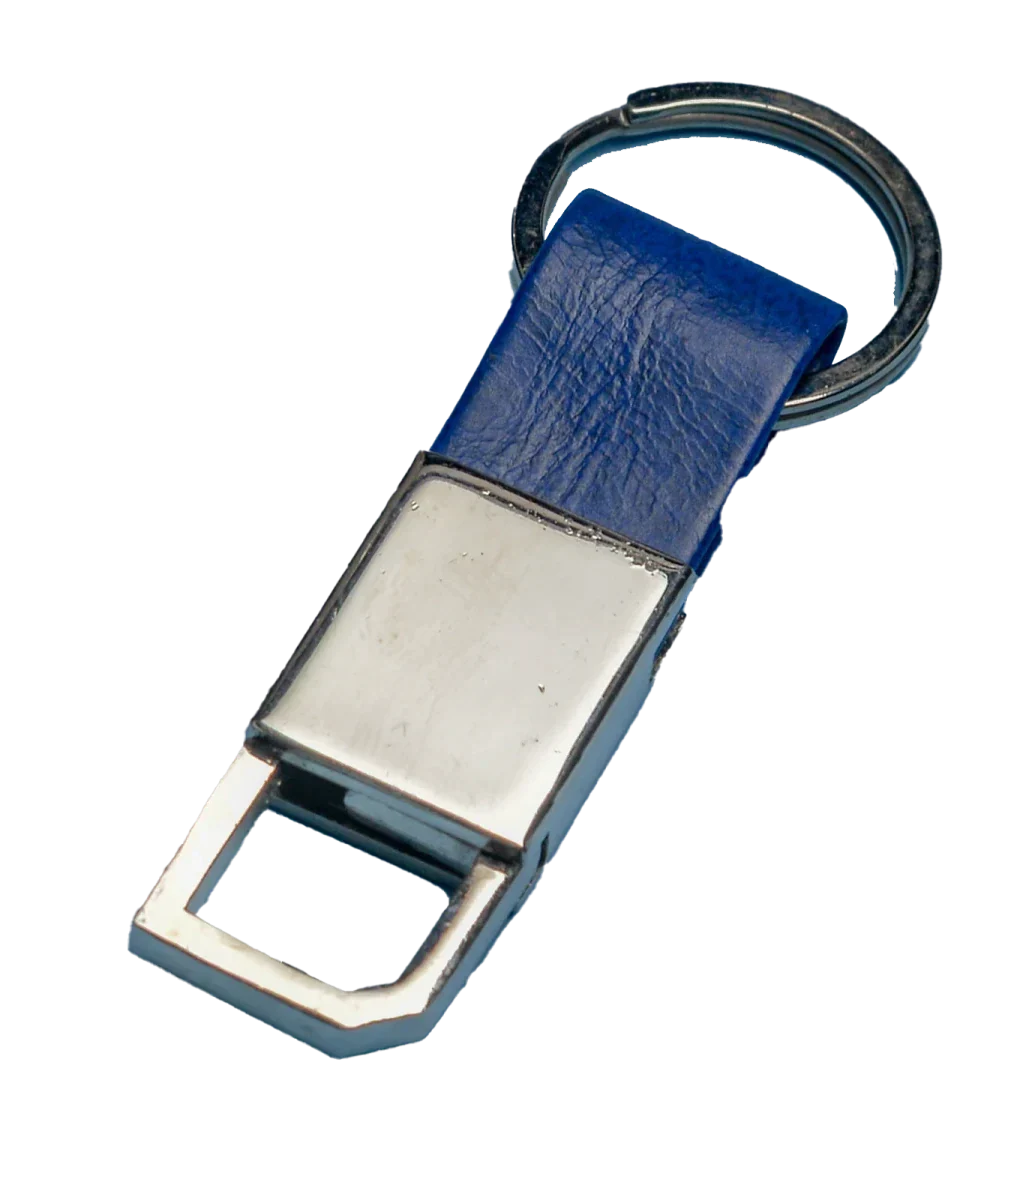 "Its compact size makes it easy to carry in your pocket or bag, providing quick access to your keys when you need them. "